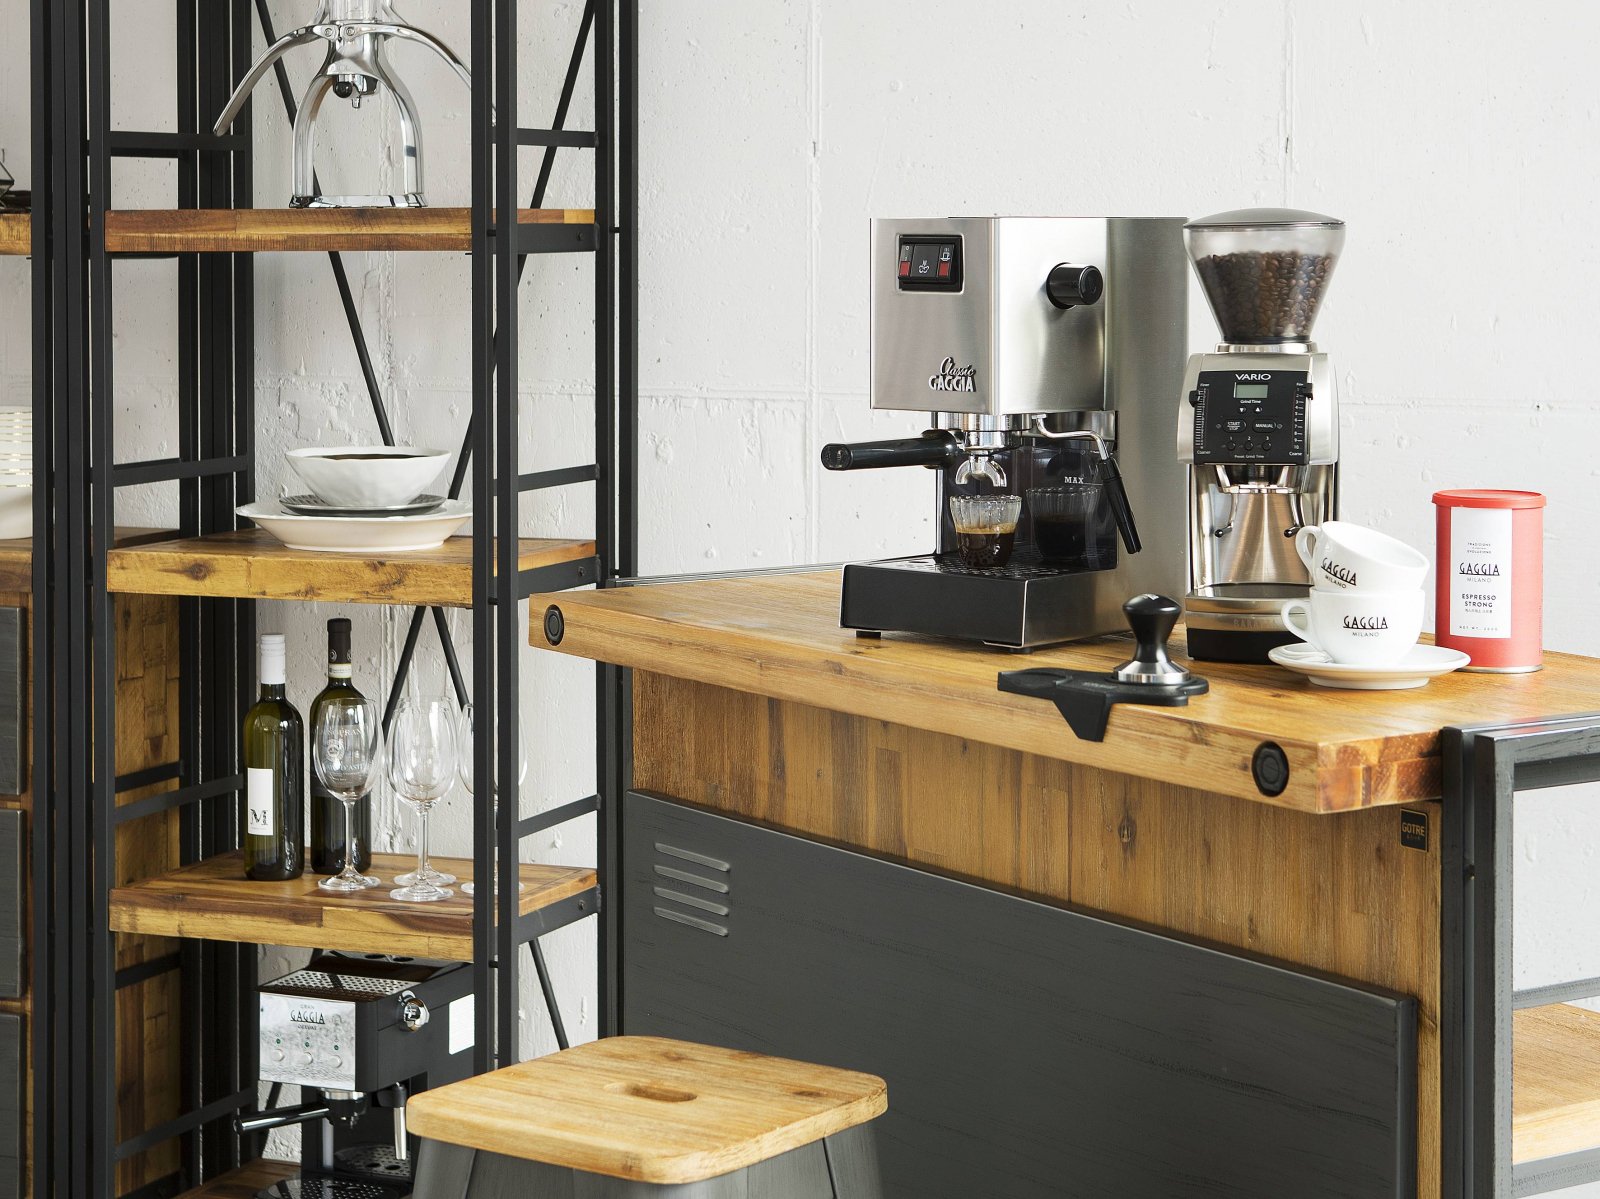 GAGGIA ガジア セミオートエスプレッソマシン Classic クラシック<img class='new_mark_img2' src='https://img.shop-pro.jp/img/new/icons34.gif' style='border:none;display:inline;margin:0px;padding:0px;width:auto;' />